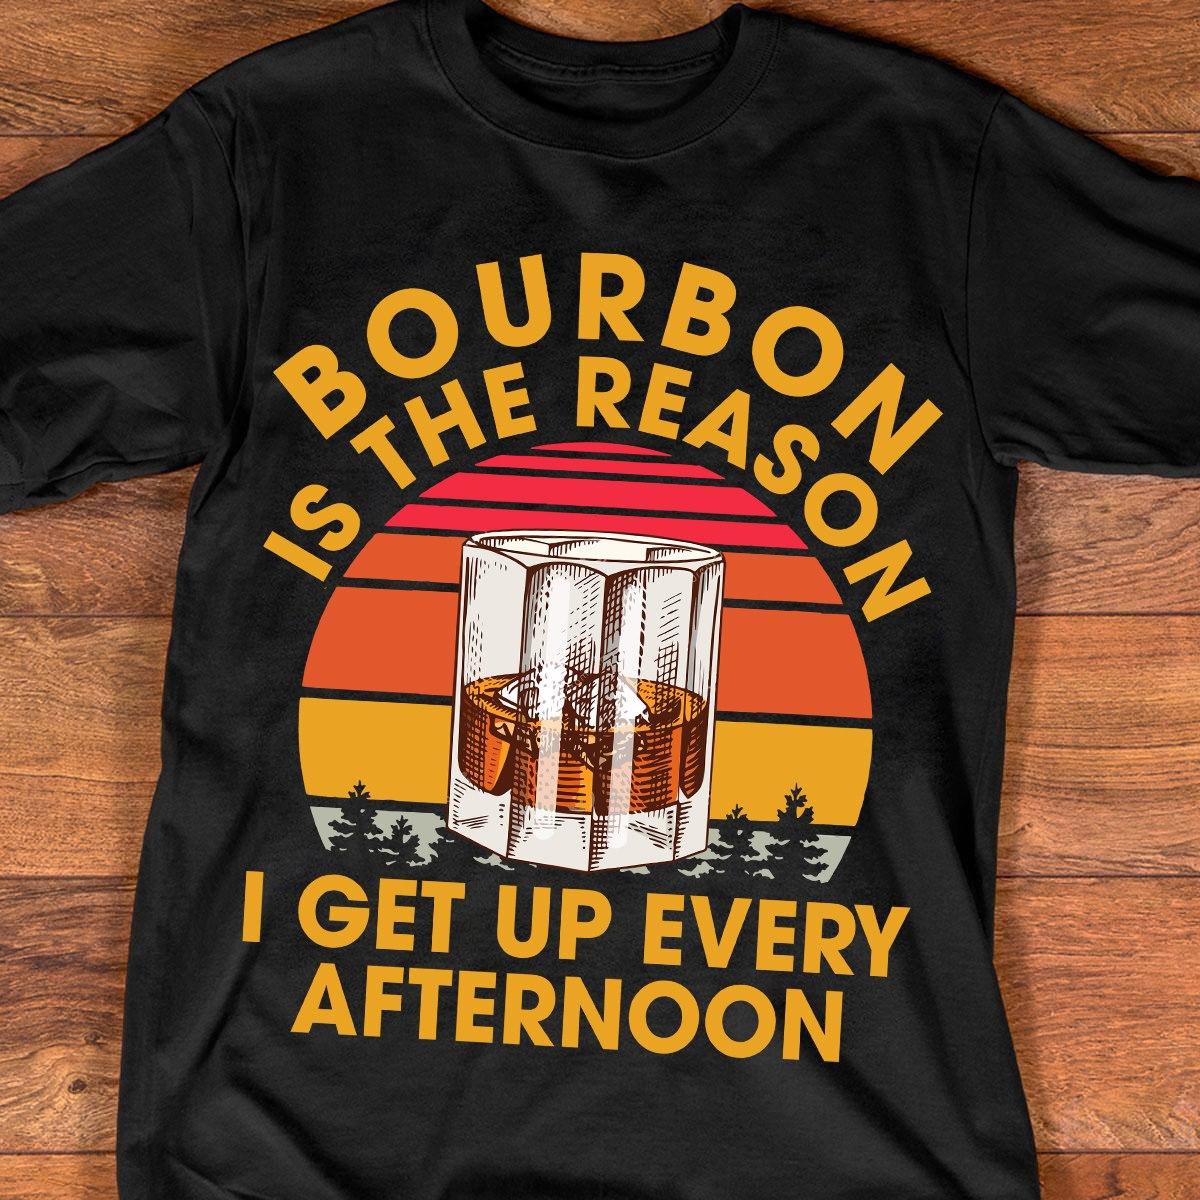 Bourbon Glass - Bourbon is the reason i get up every afternoon